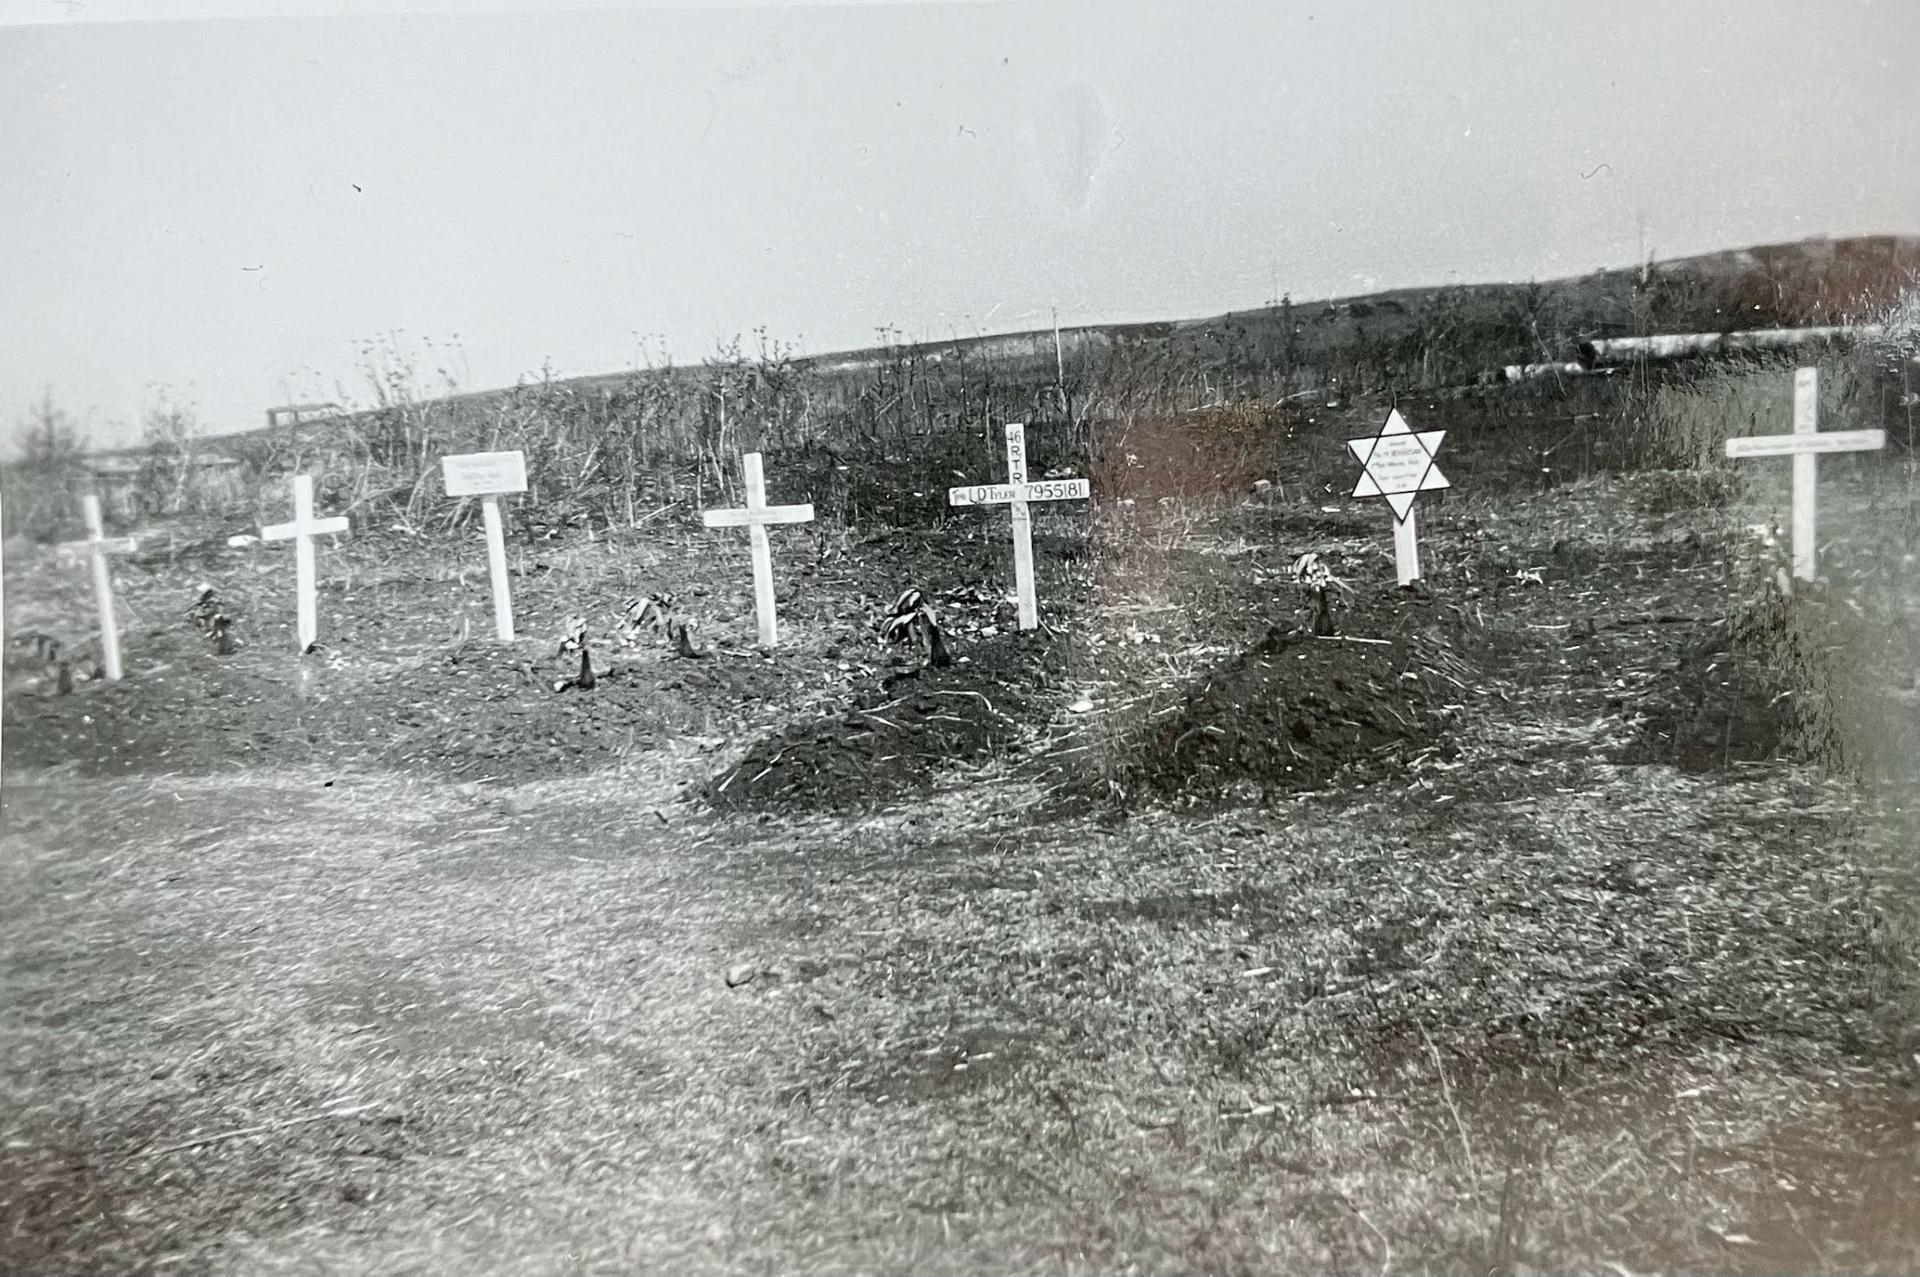 A cemetery for fallen soldiers with religious markers at each grave in southern Italy, date unknown.